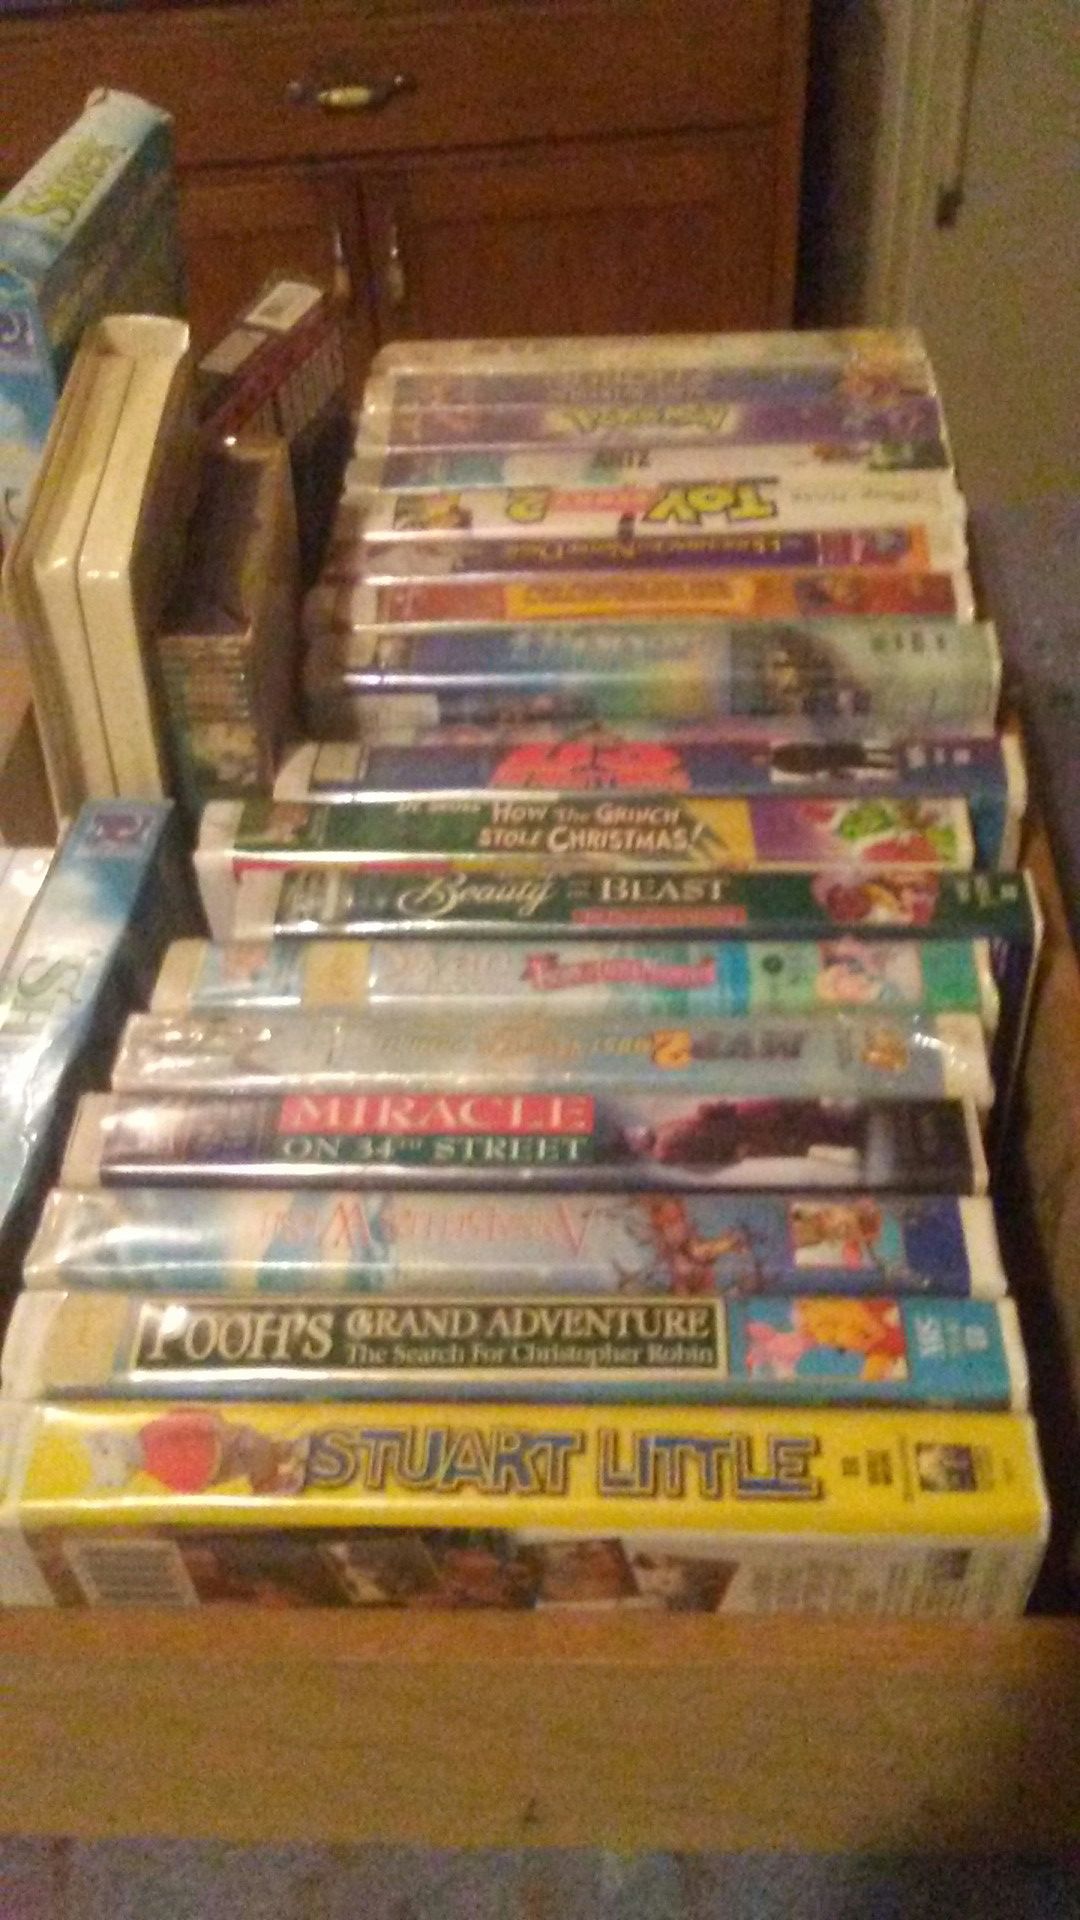 24 VCR MOVIES